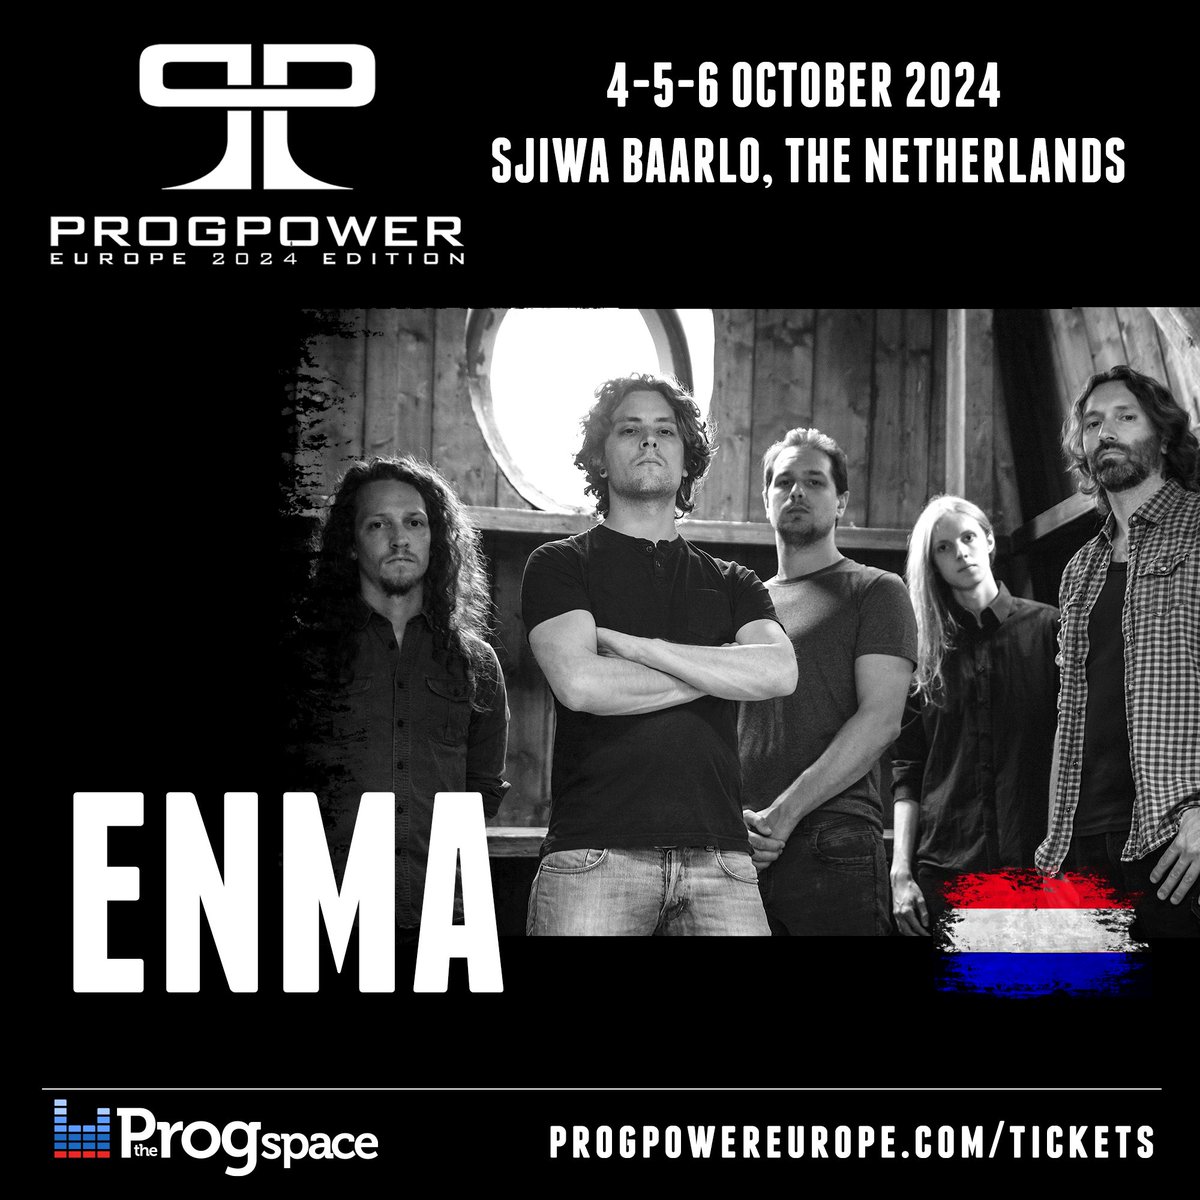 8th band at @ProgPowerEurope - ENMA released a strong debut (2022) which took them on tour with Soen, Riverside, Napalm Death, etc. Progmetal+grunge grooves, drifting from melancholic tunes to fierce outburst forms a wide array of heavy goodness. theprogspace.com/enma-ppe2024/